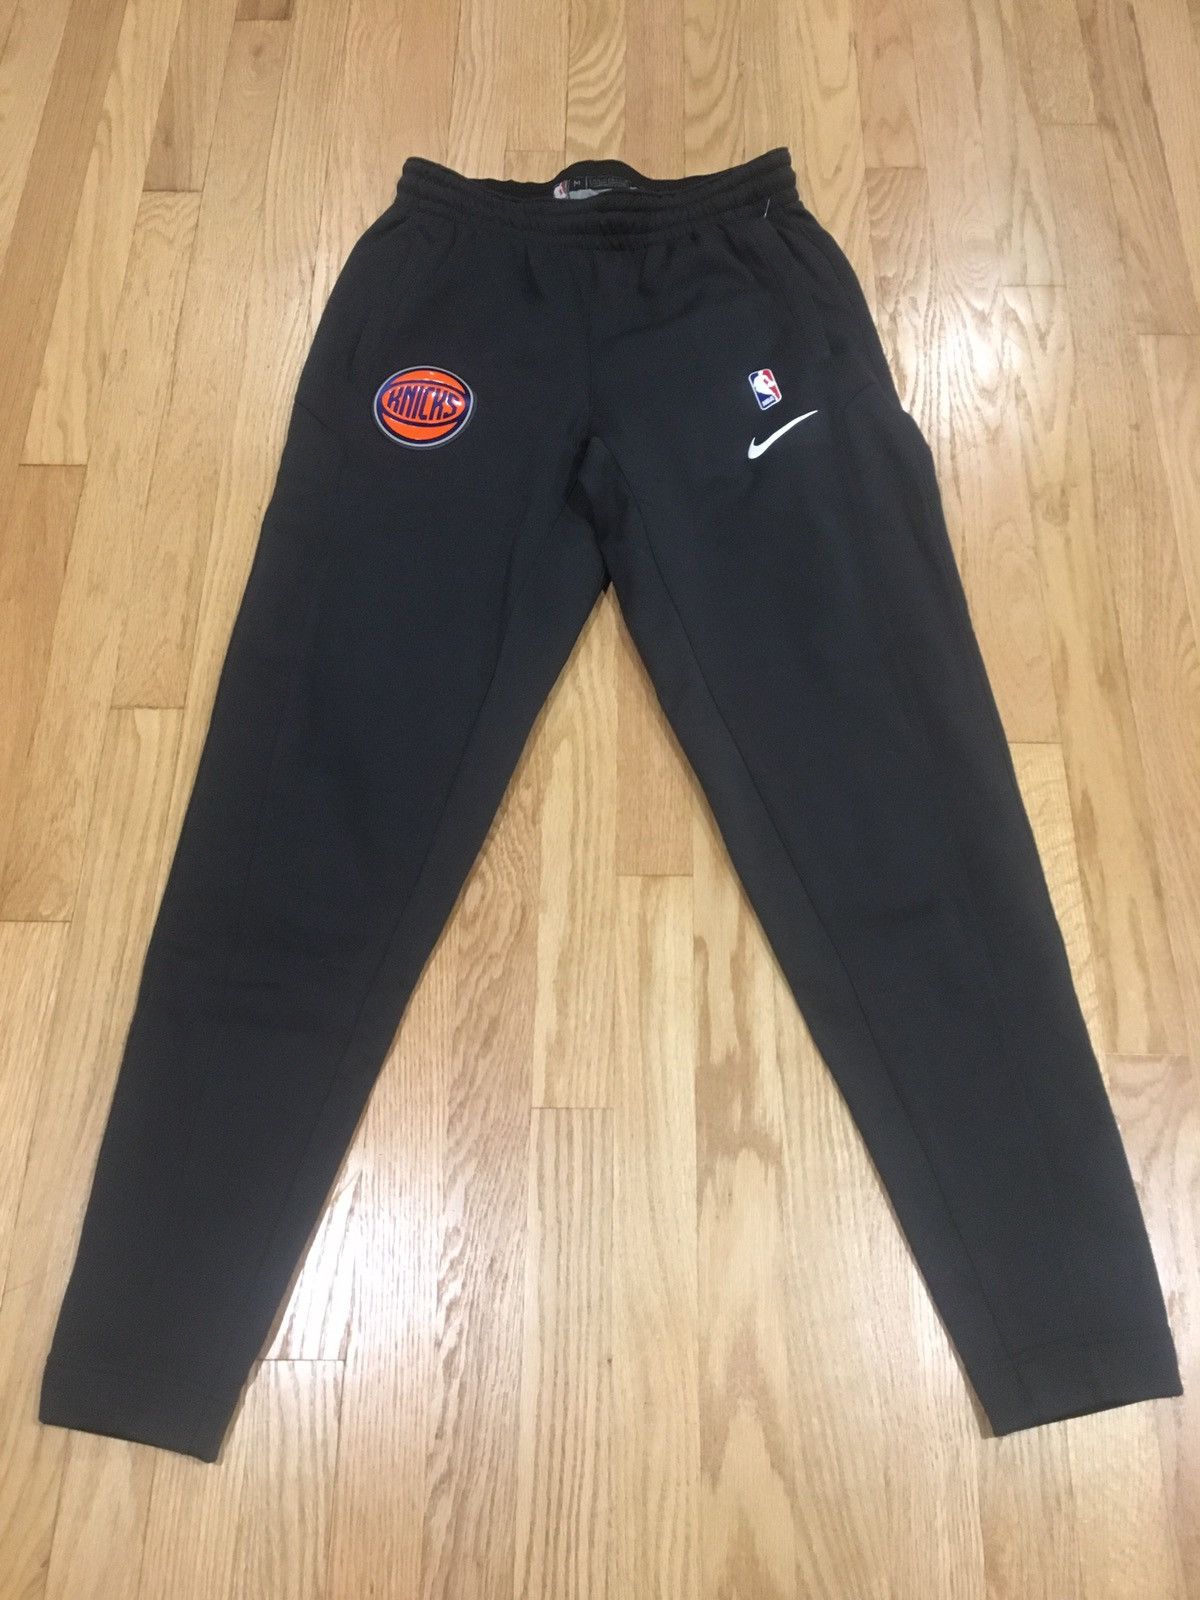 Nike New York Knicks Sweatpants Joggers Practice Warmup On-Court Size US 33 - 1 Preview